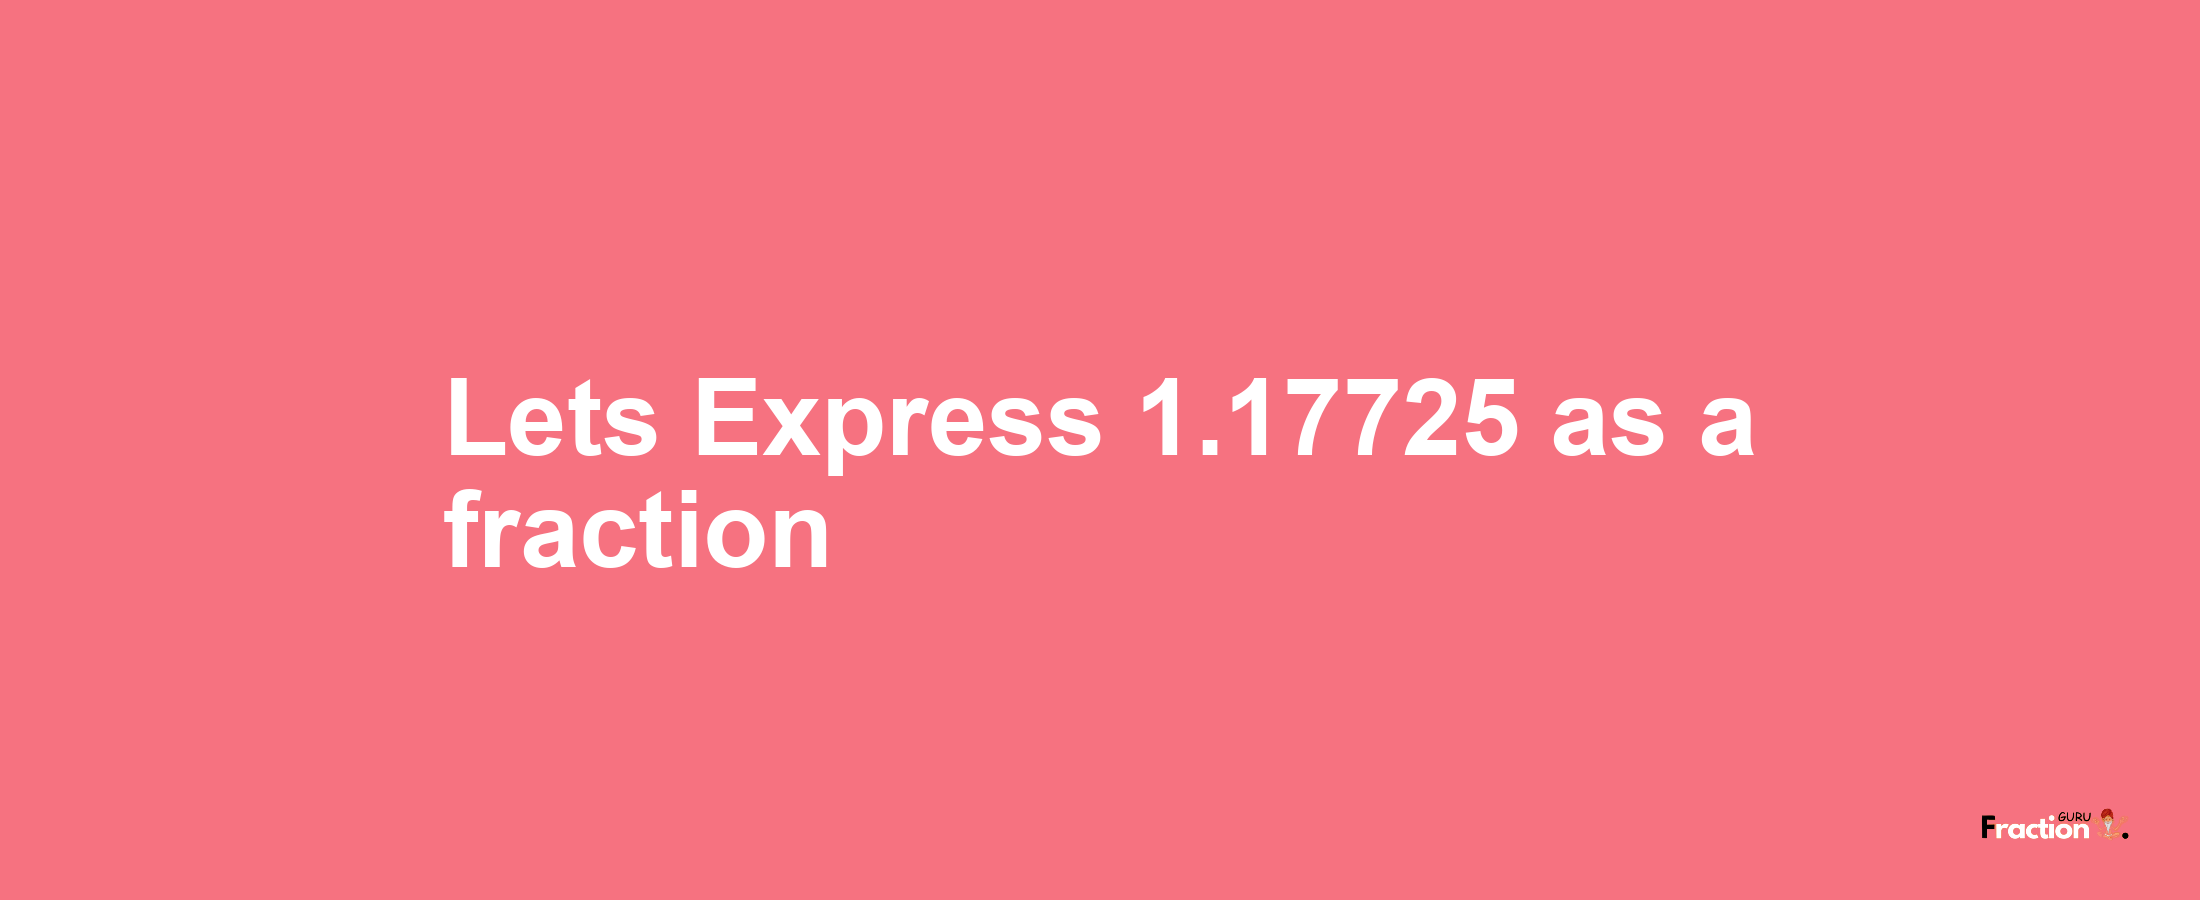 Lets Express 1.17725 as afraction